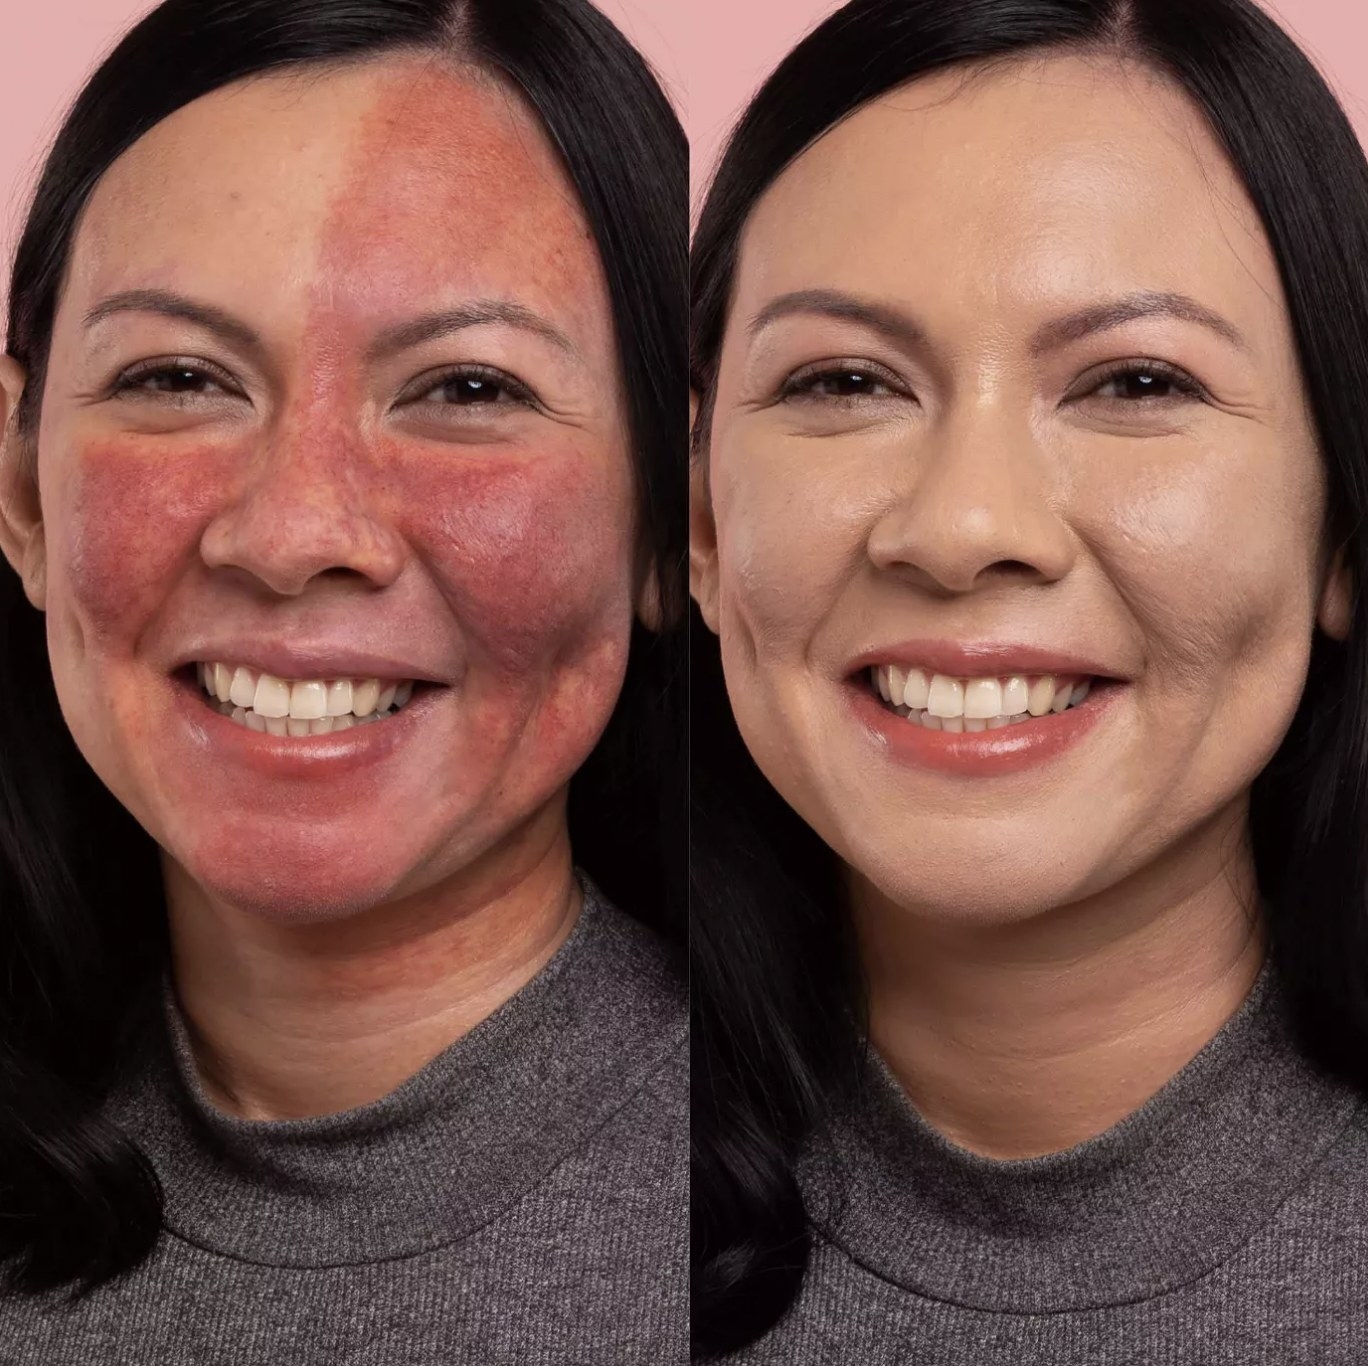 A woman showing before and after images of her face with using CC cream